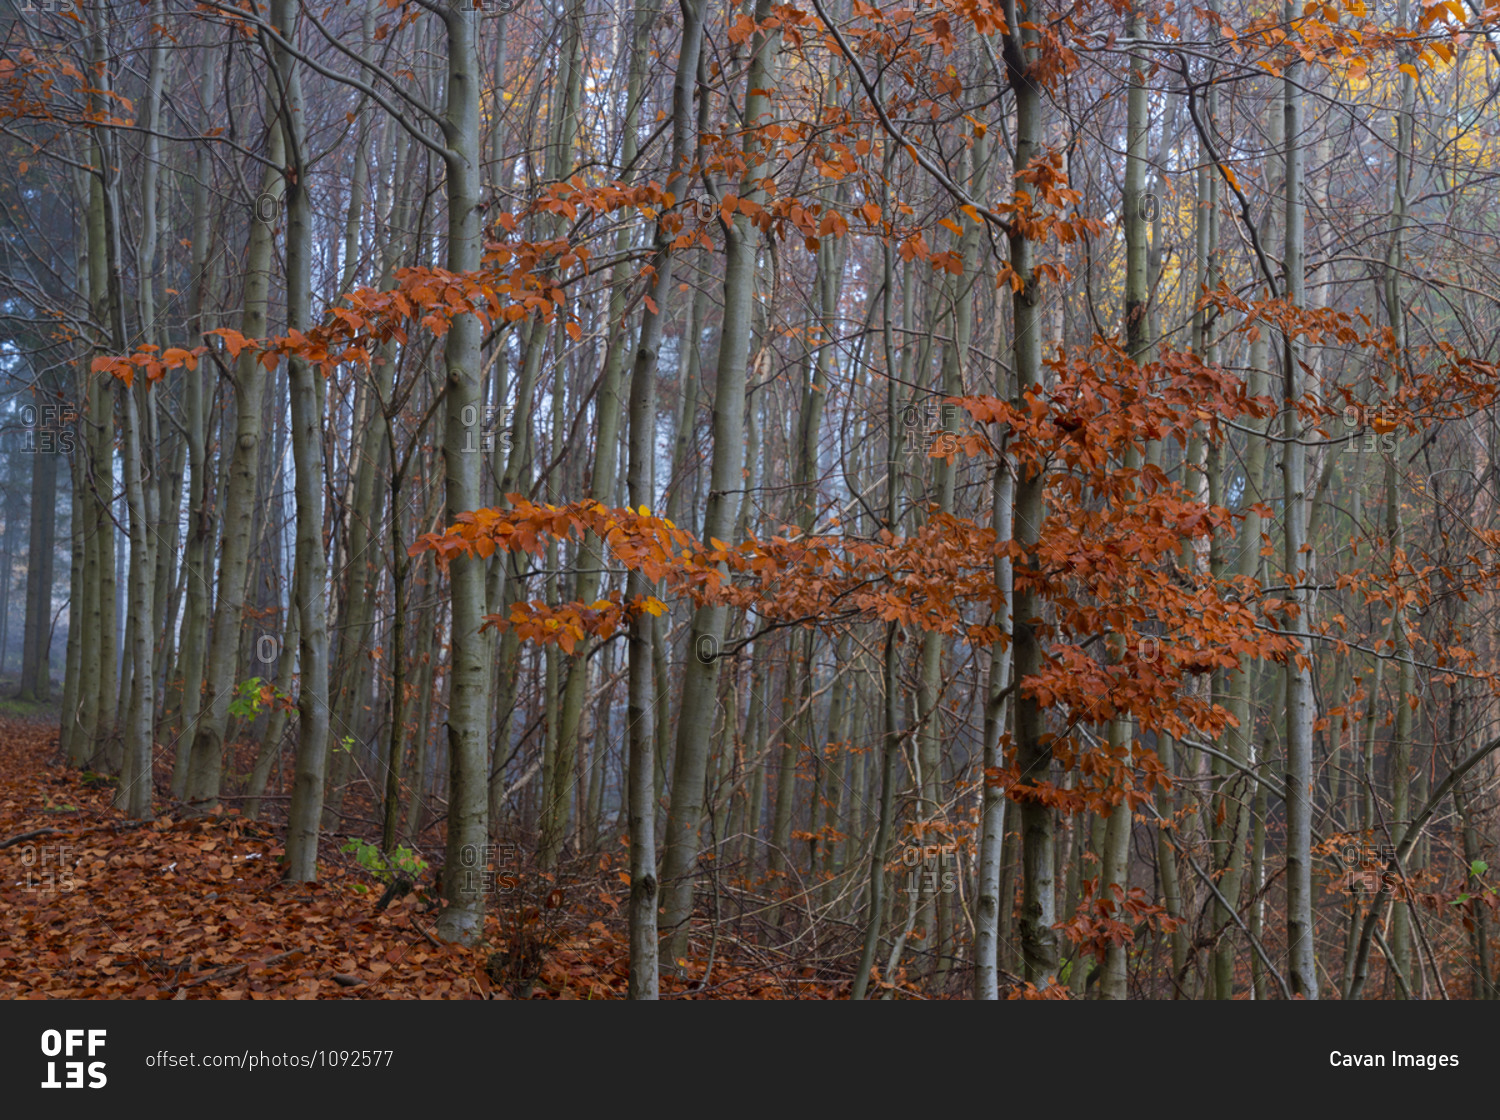 Trees with orange leaves in forest during autumn, central bohemian region, Czech republic